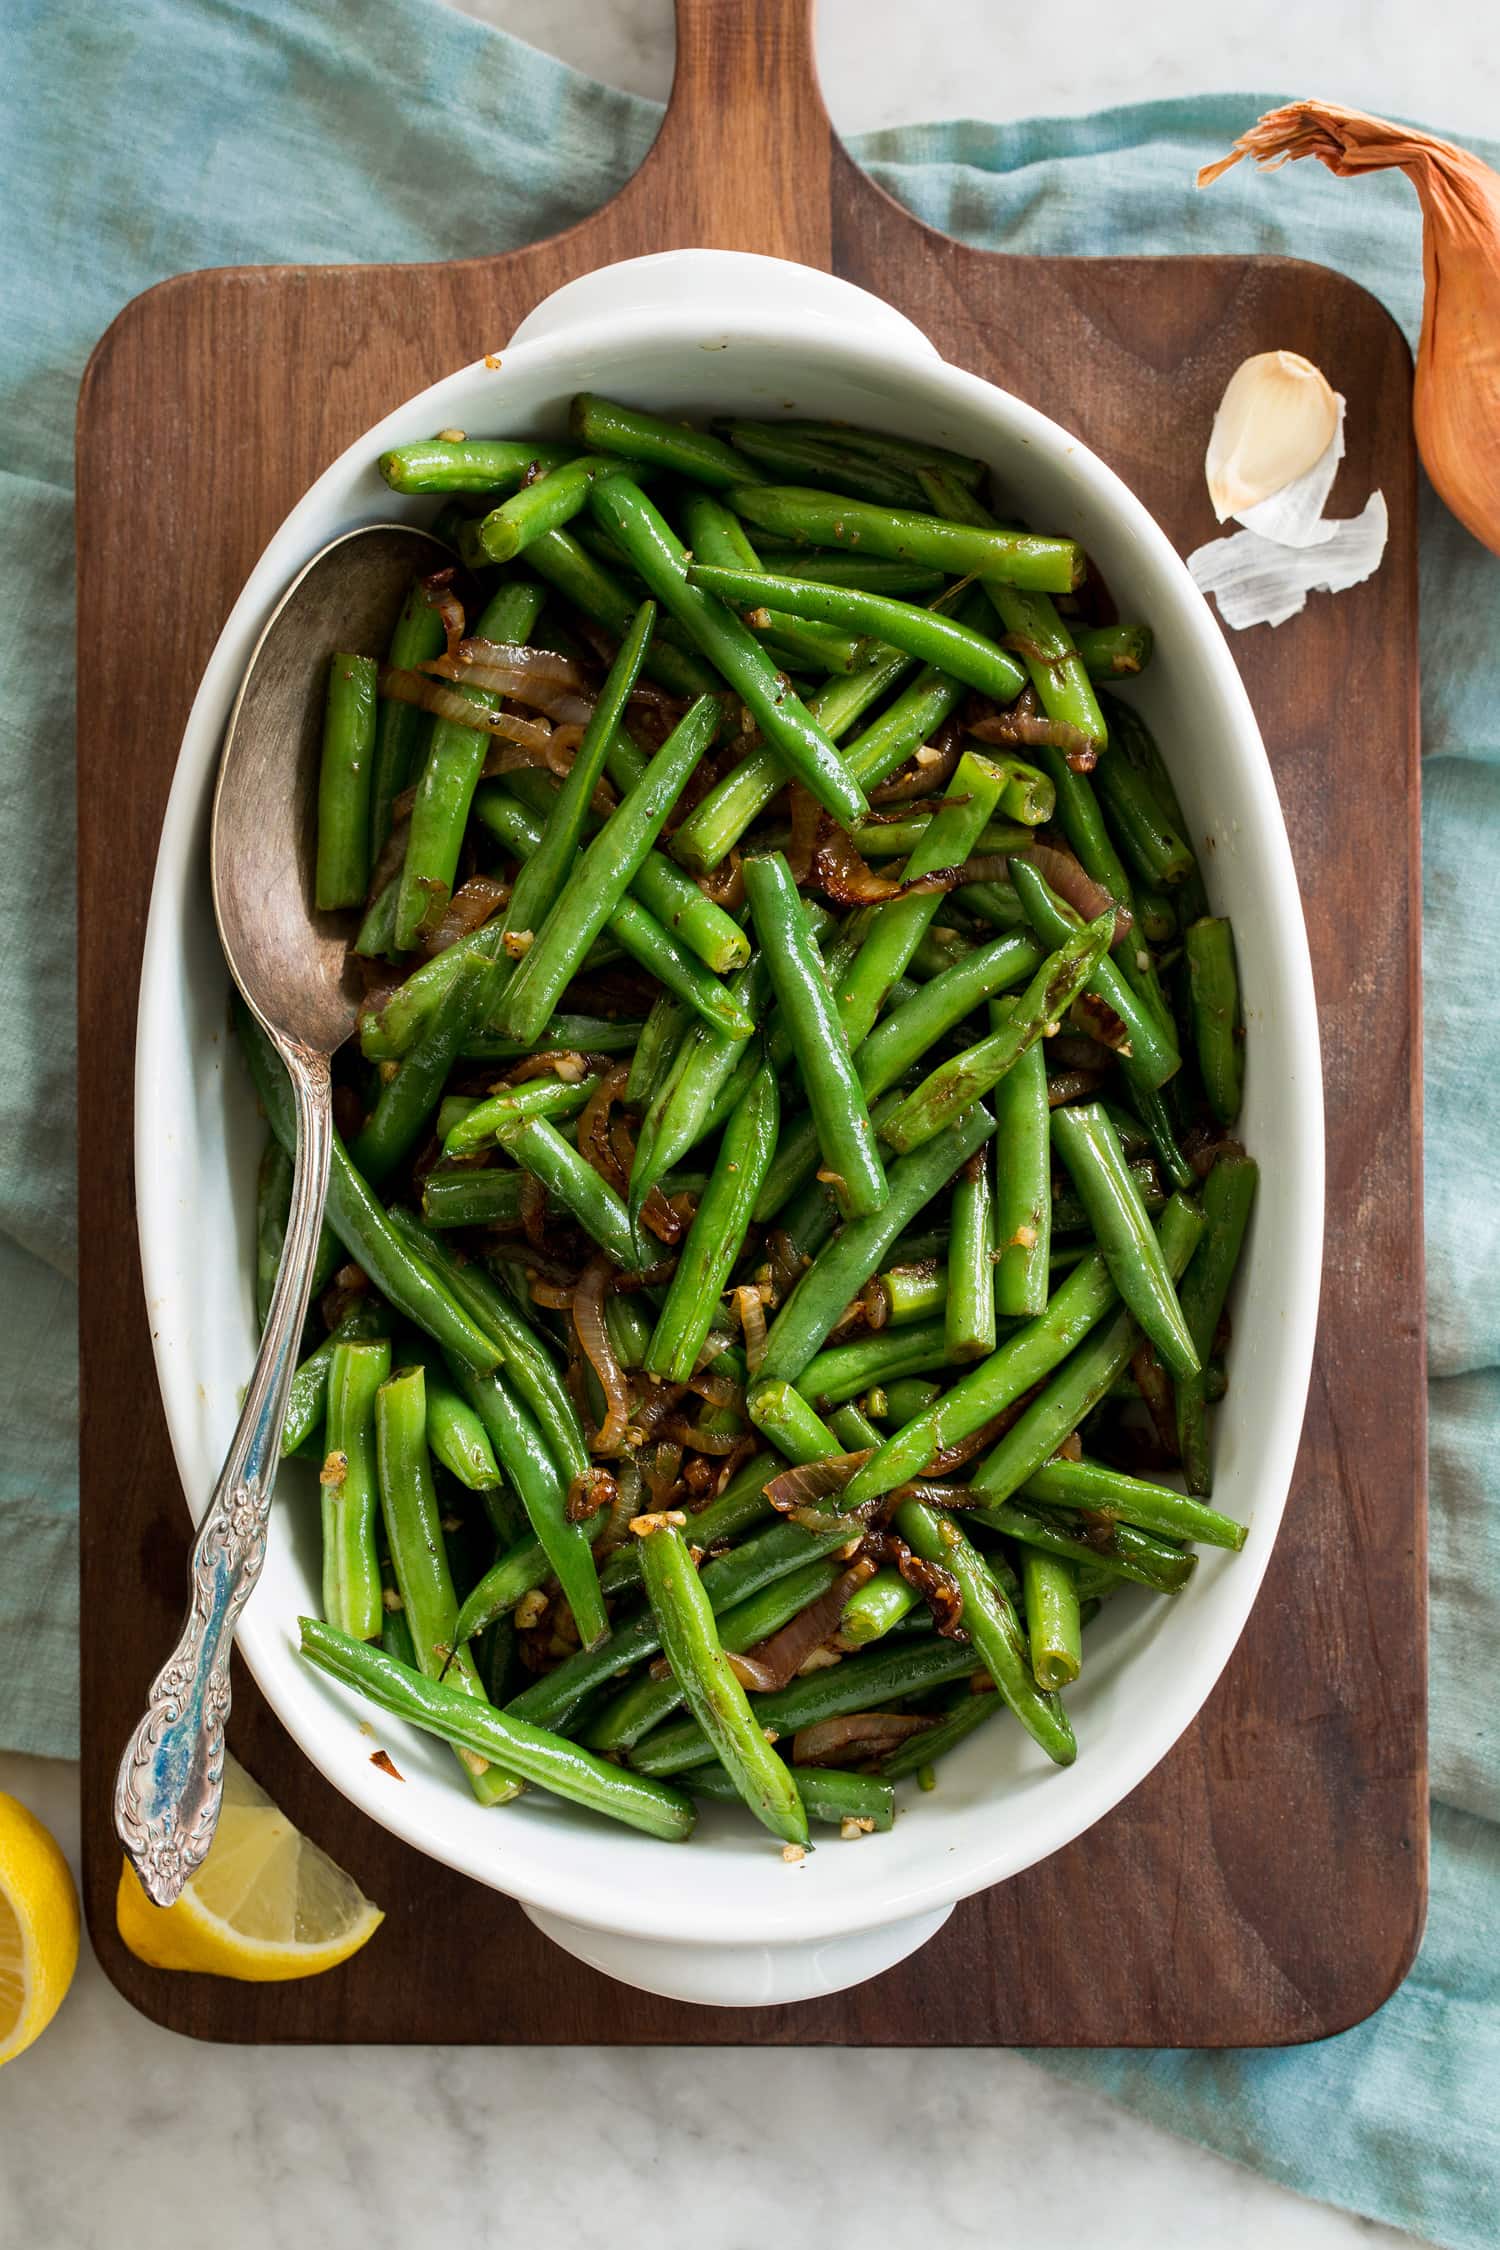 Sauteed green beans shown from above in an oval ceramic dish on a wooden tray.